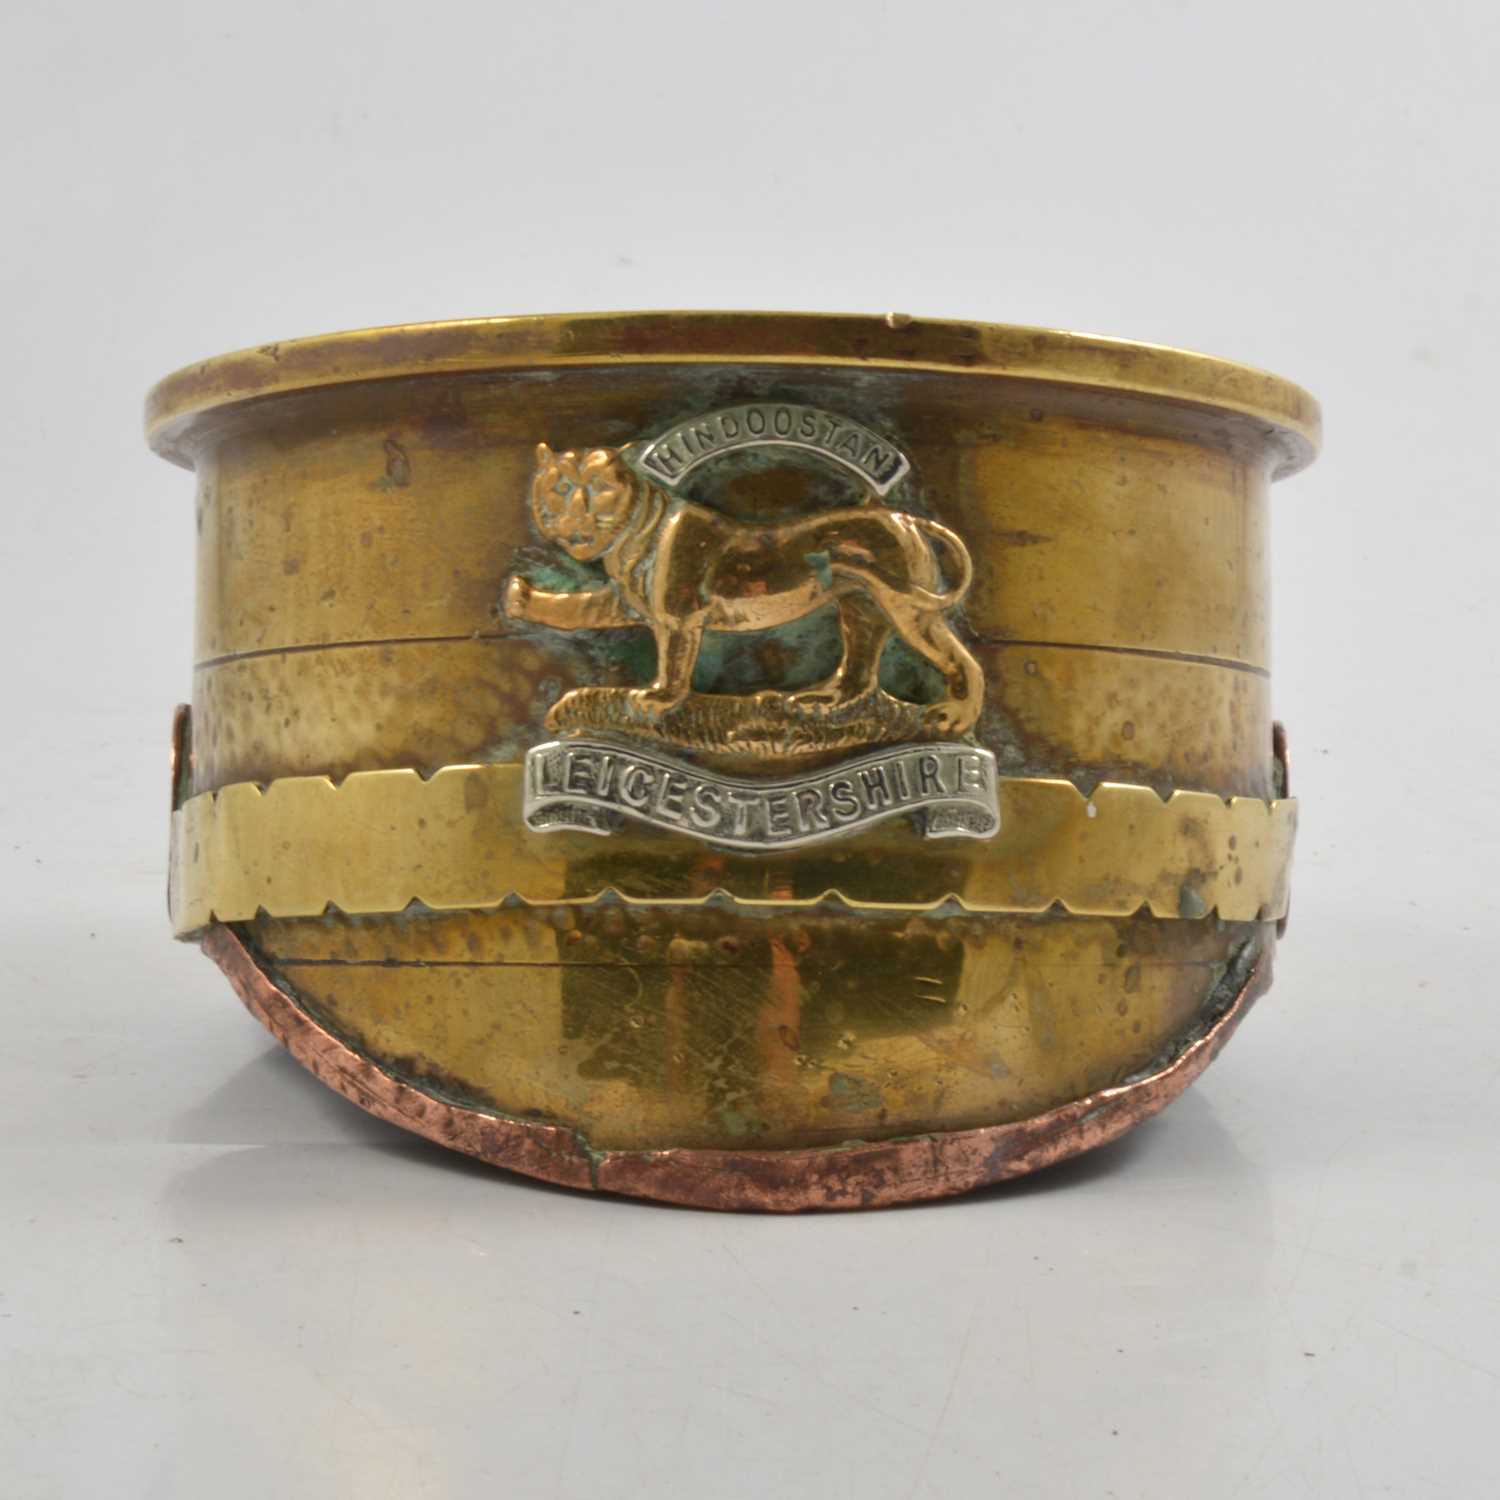 Lot 184 - Military: WWI Trench art peaked cap ashtray / paperweight.